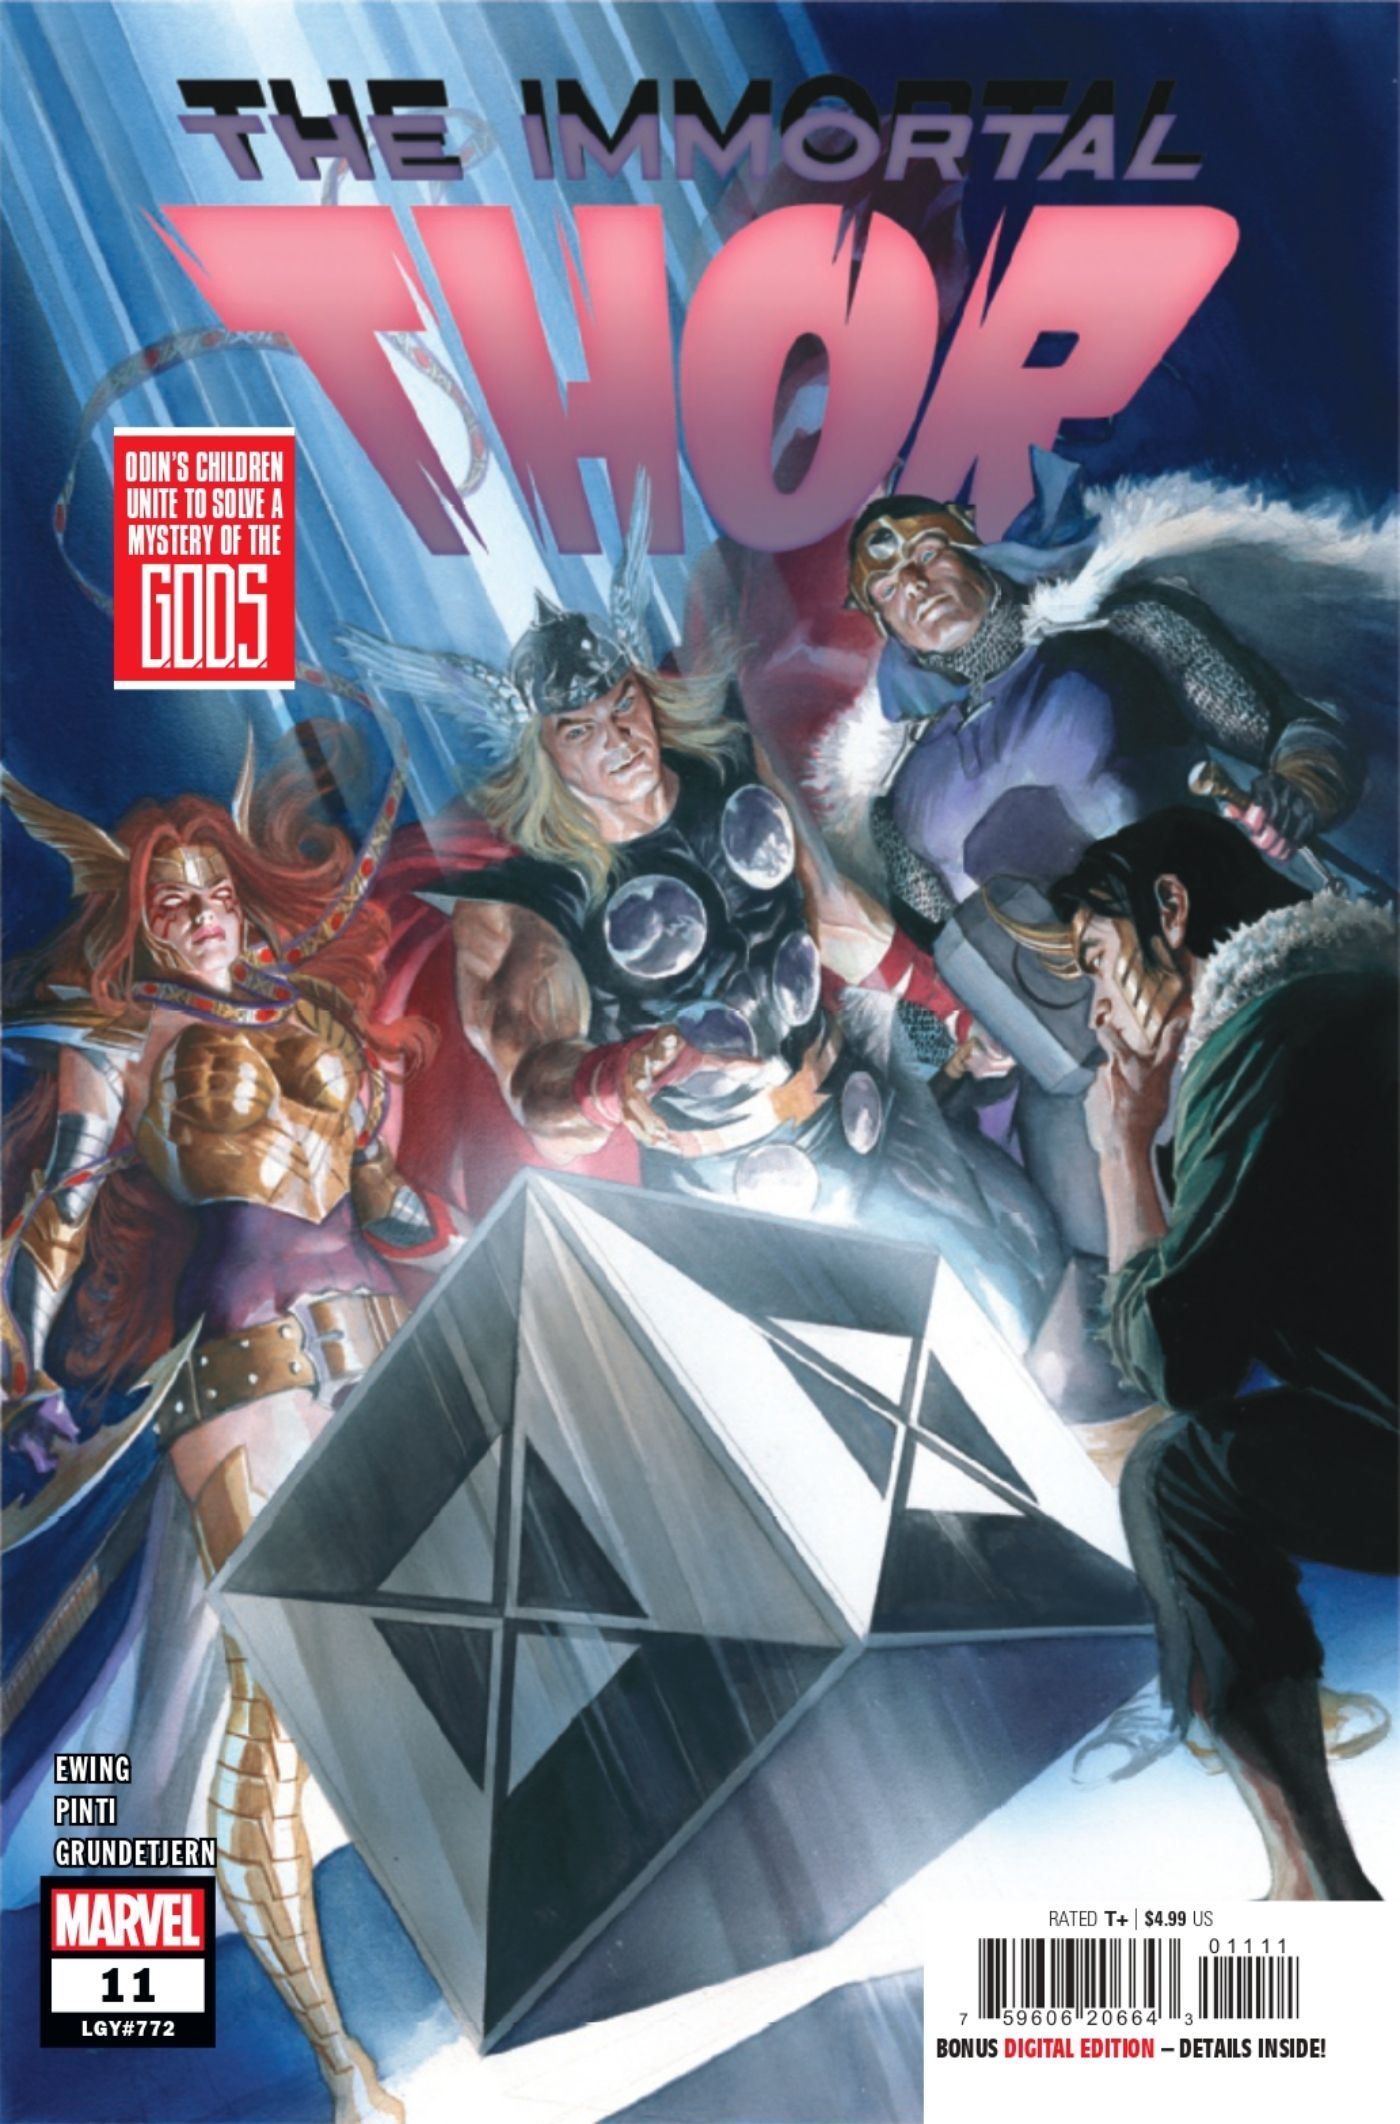 The Immortal Thor #11 cover art featuring Thor and the mysterious box.